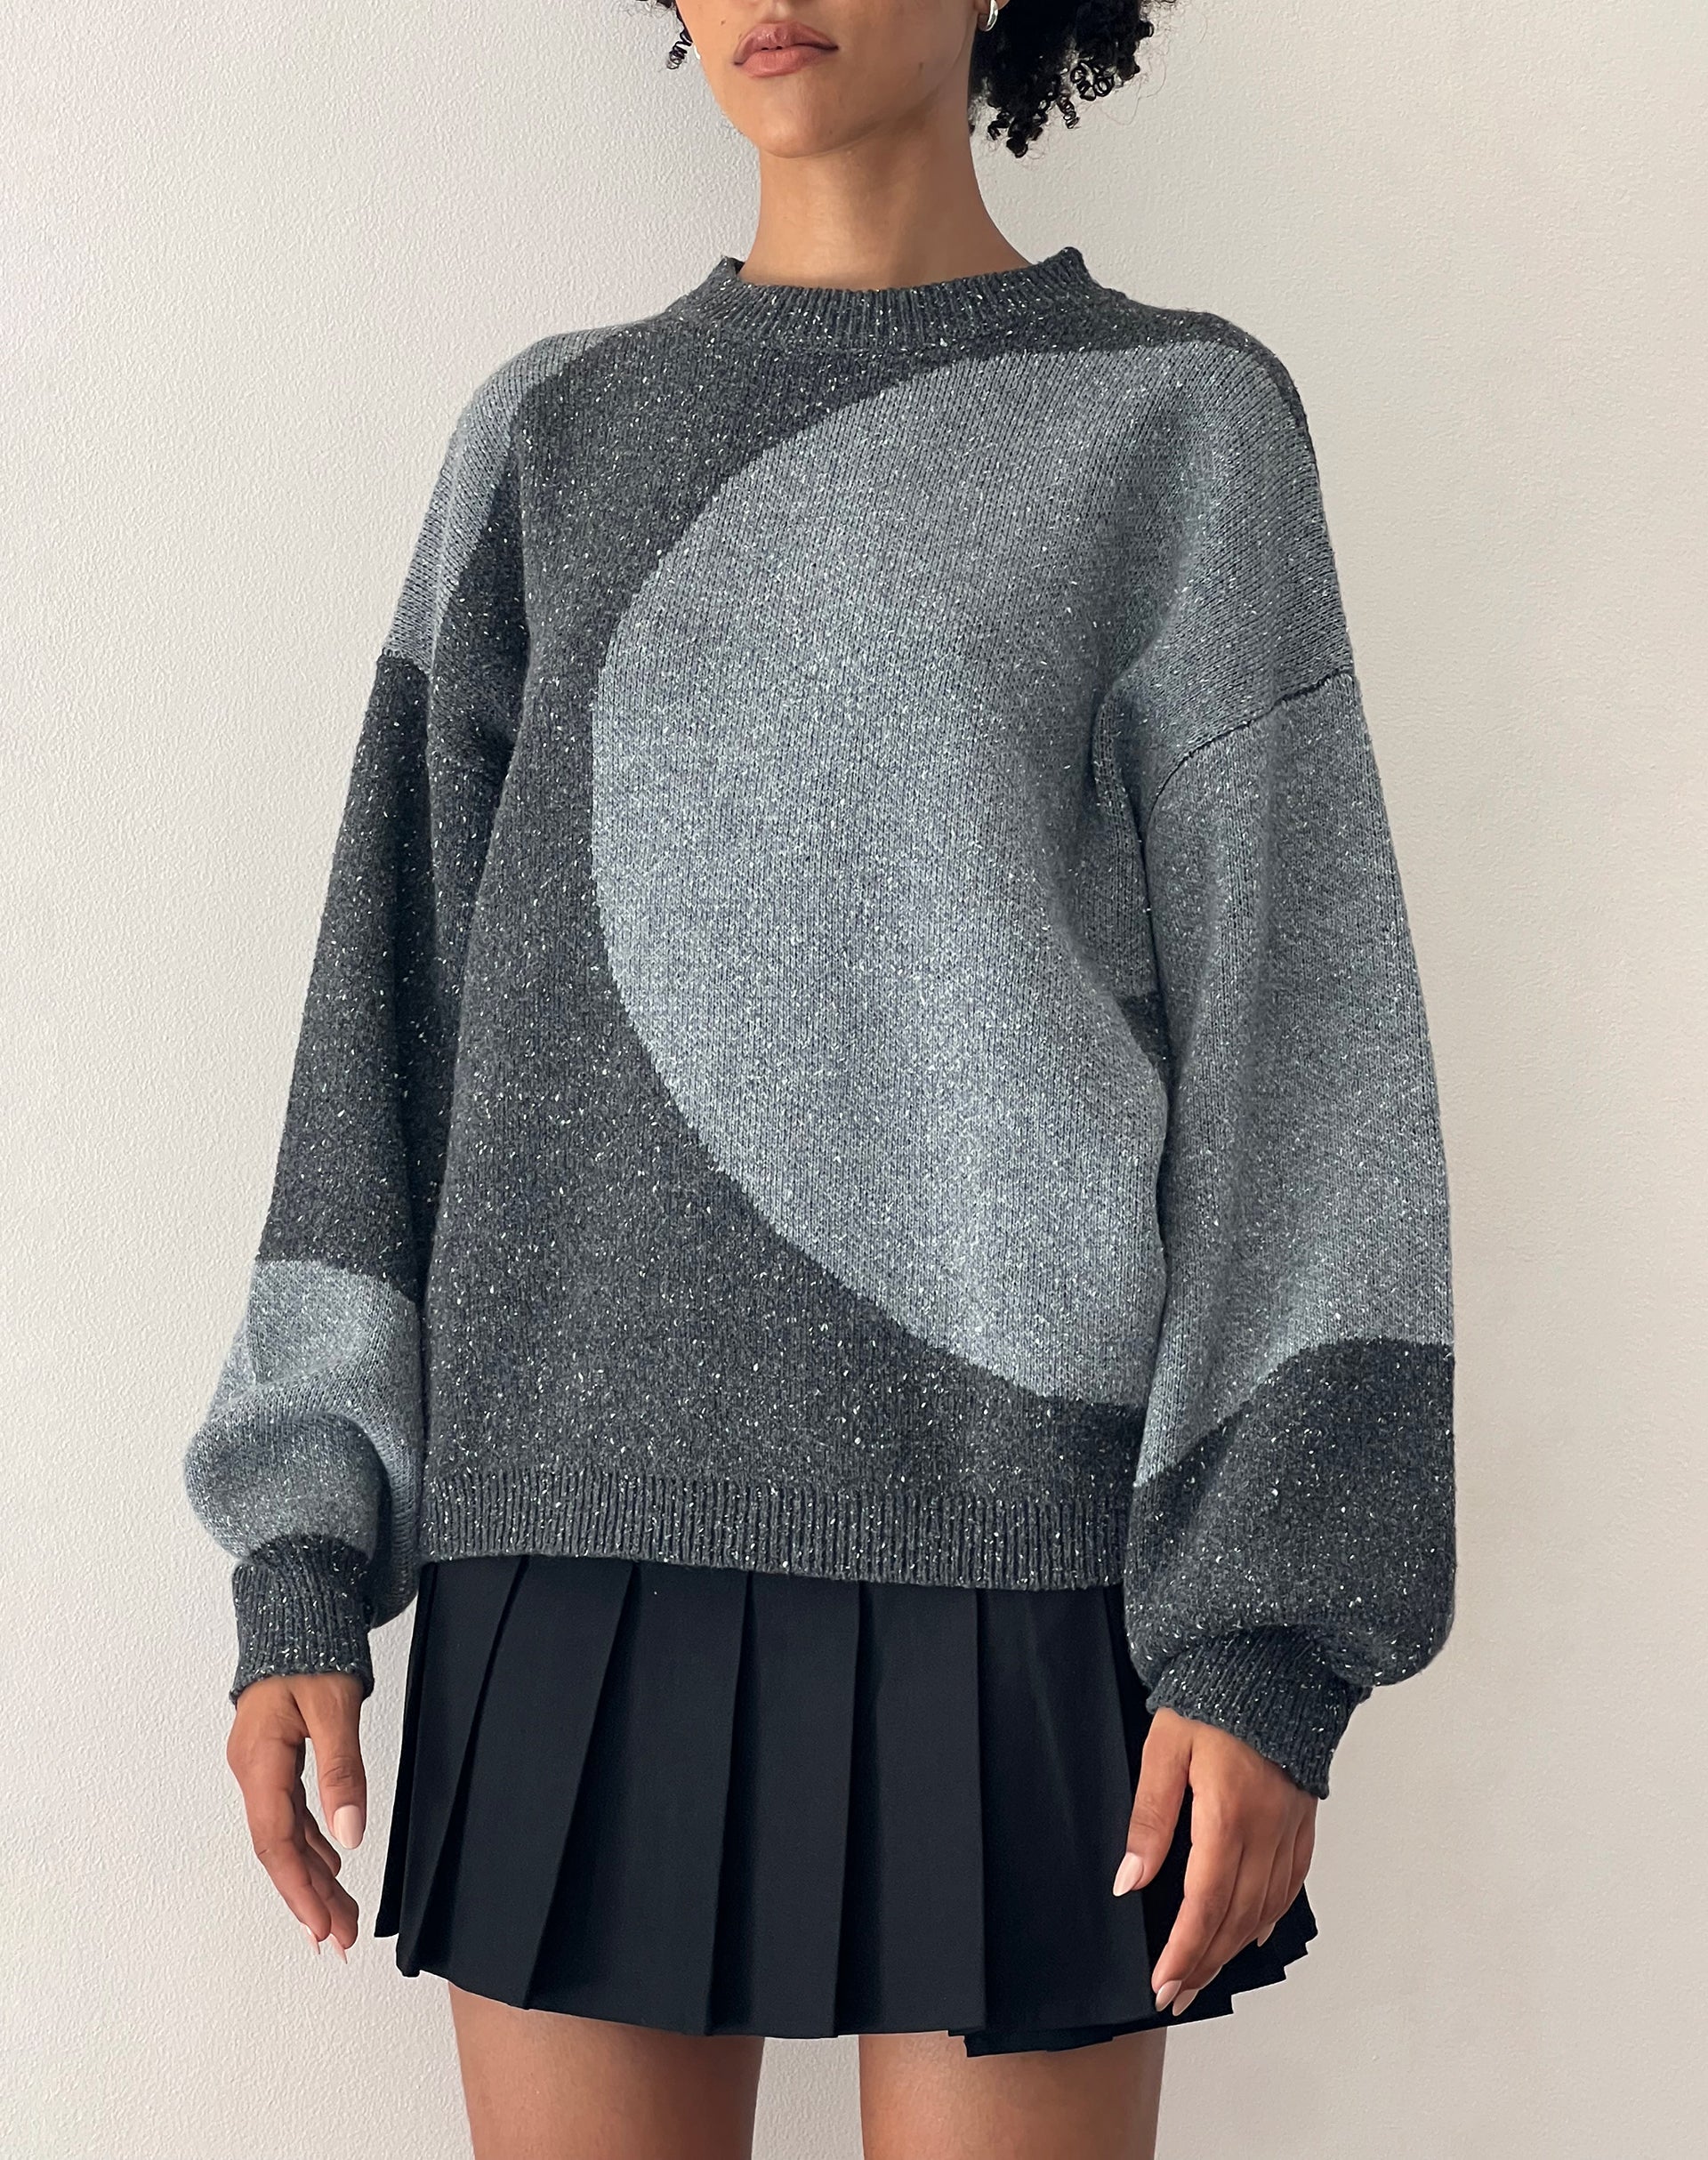 Image of Namari Jumper in Black and Charcoal Mix Knit